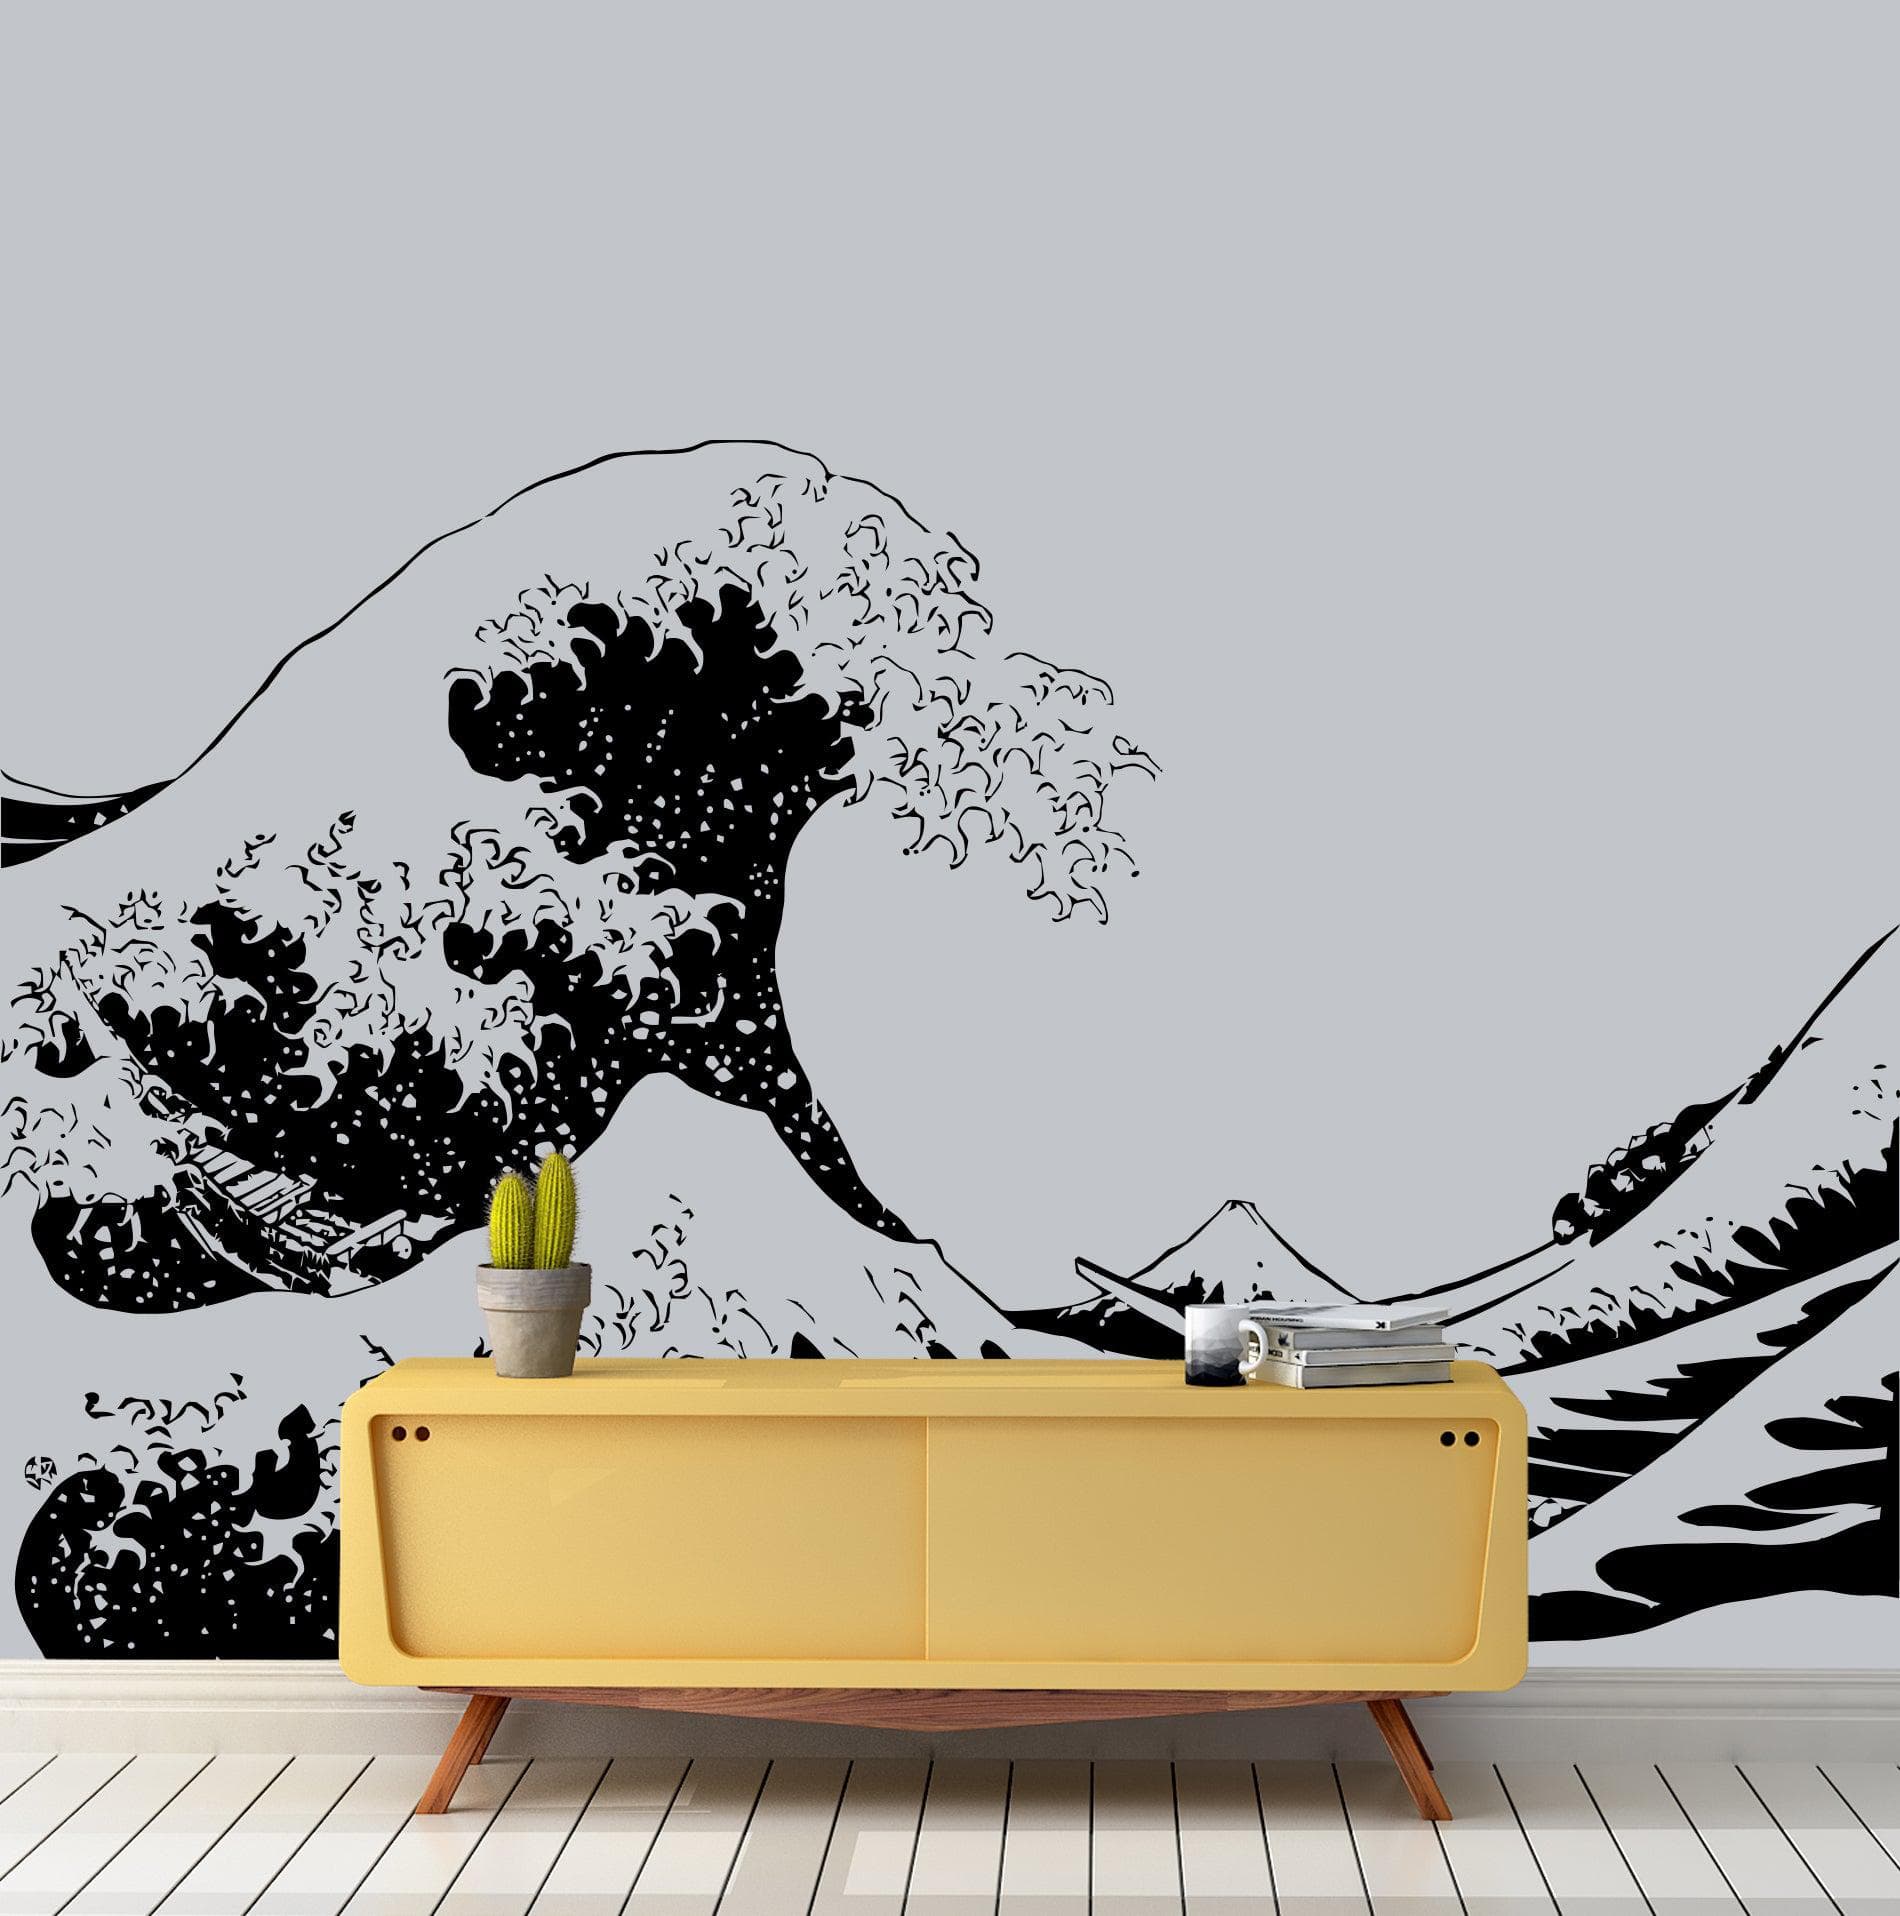 The Great Wave wall decal on a white wall above a yellow table.